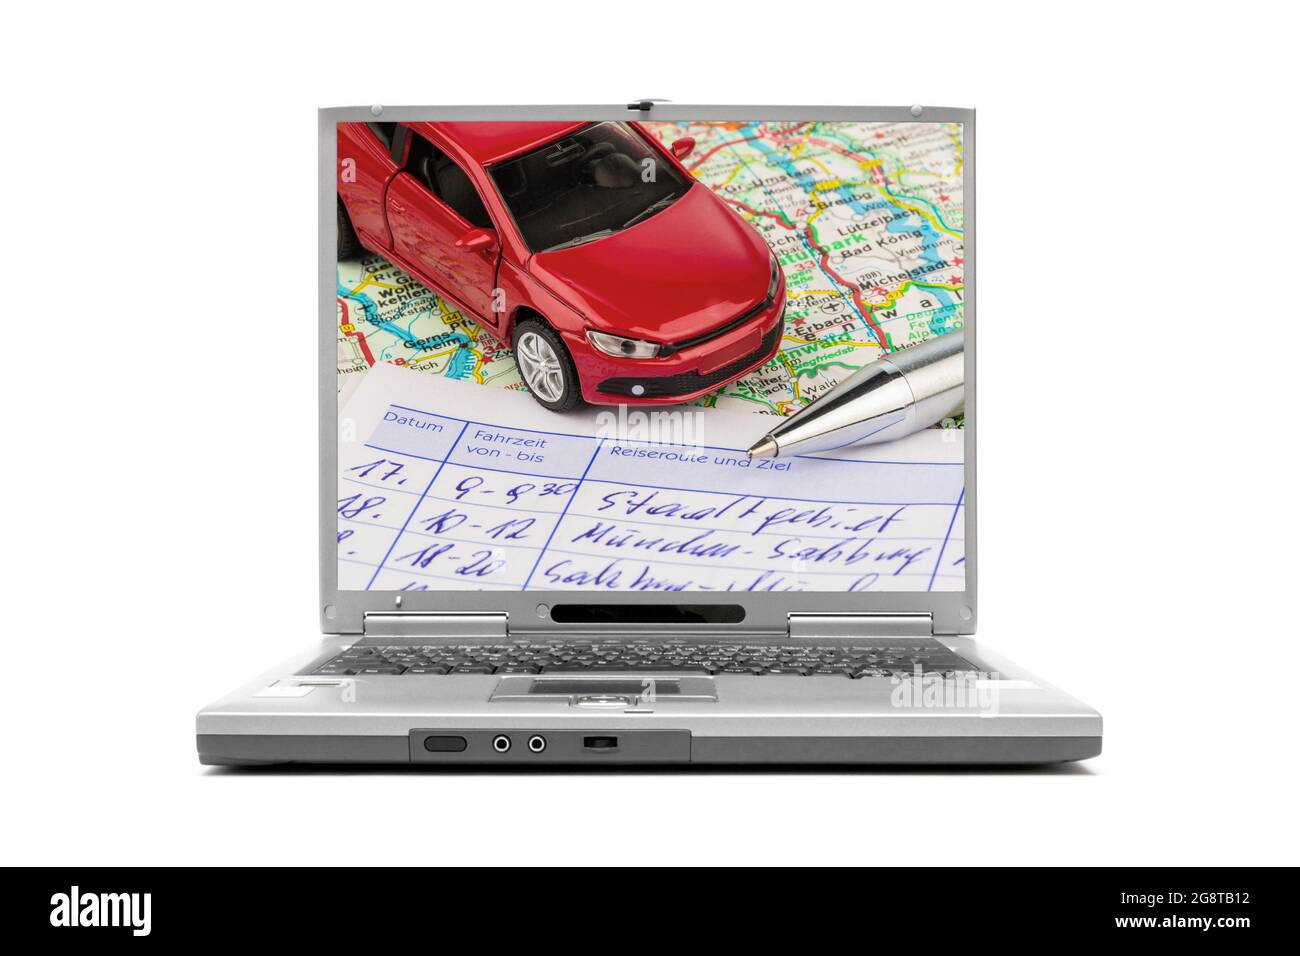 Car, road map and logbook on a laptop display Stock Photo